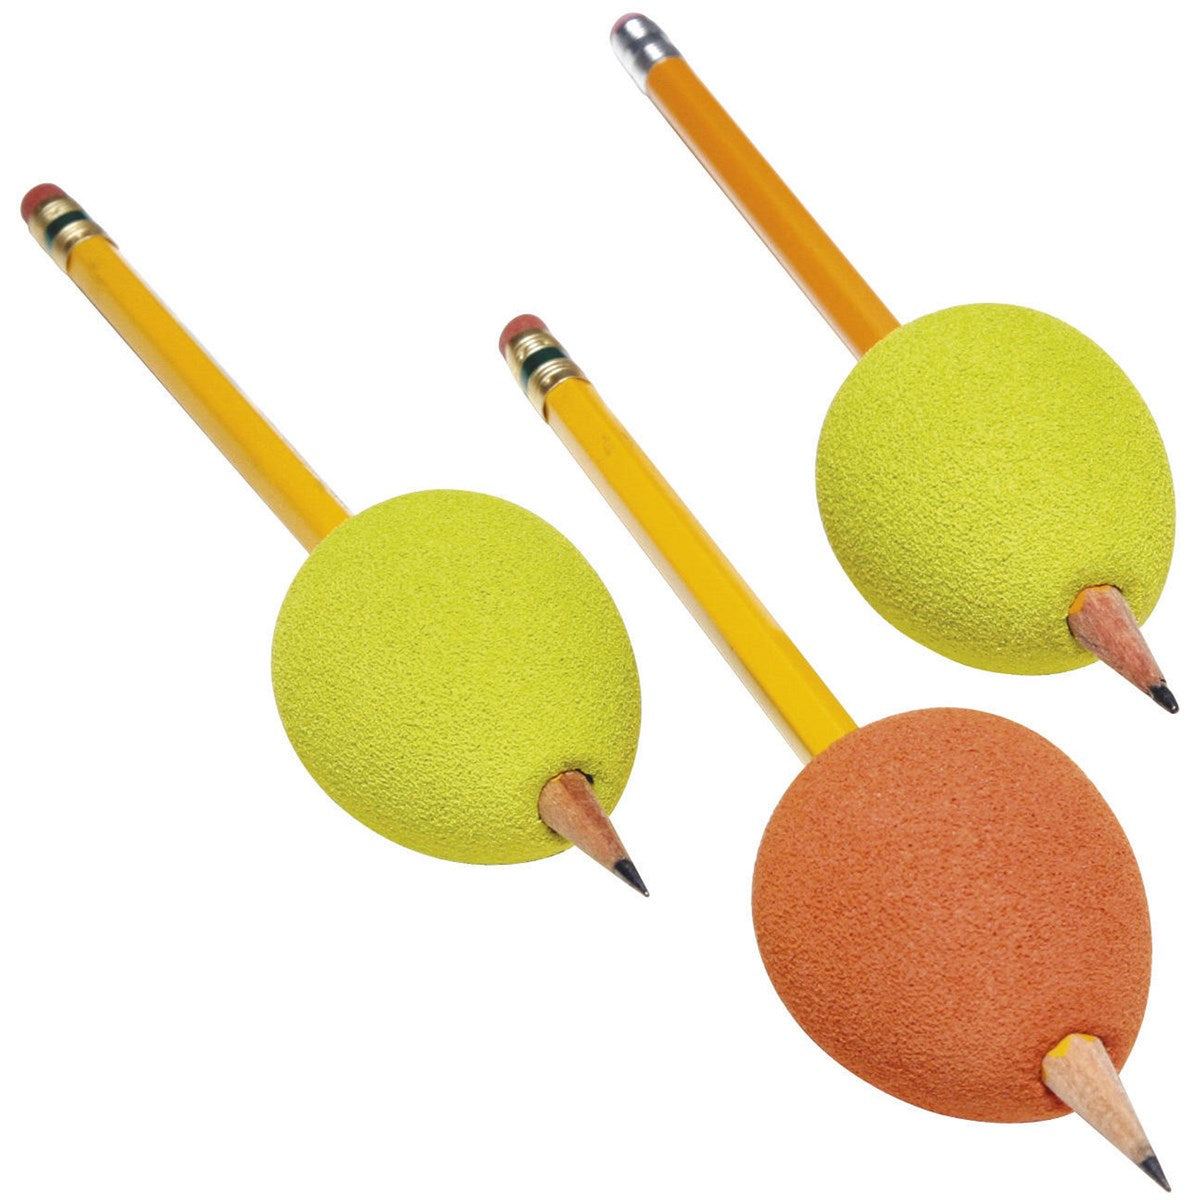 Egg-Ohs! Pencil Grips